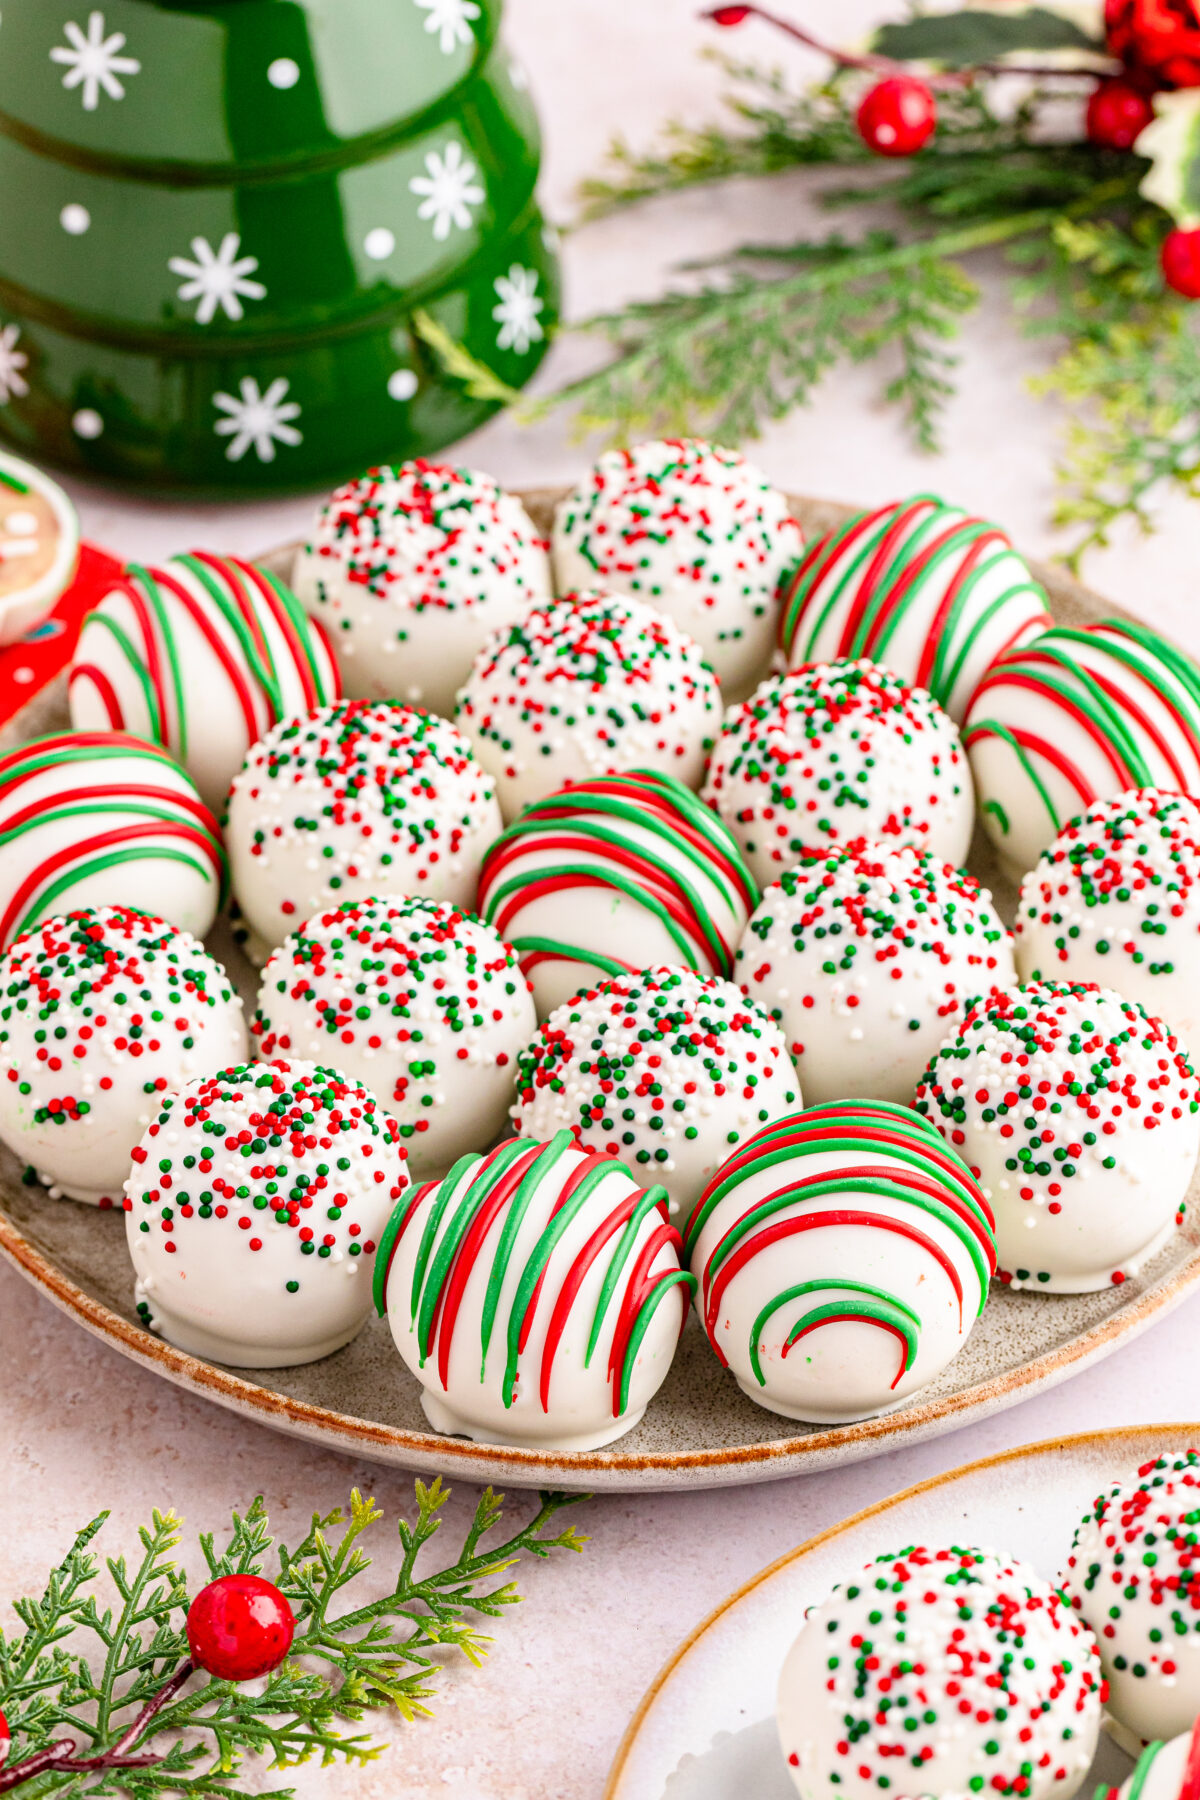 Get in the holiday spirit with these delicious, no-bake Christmas sugar cookie balls that are just perfect for any festive event or party!